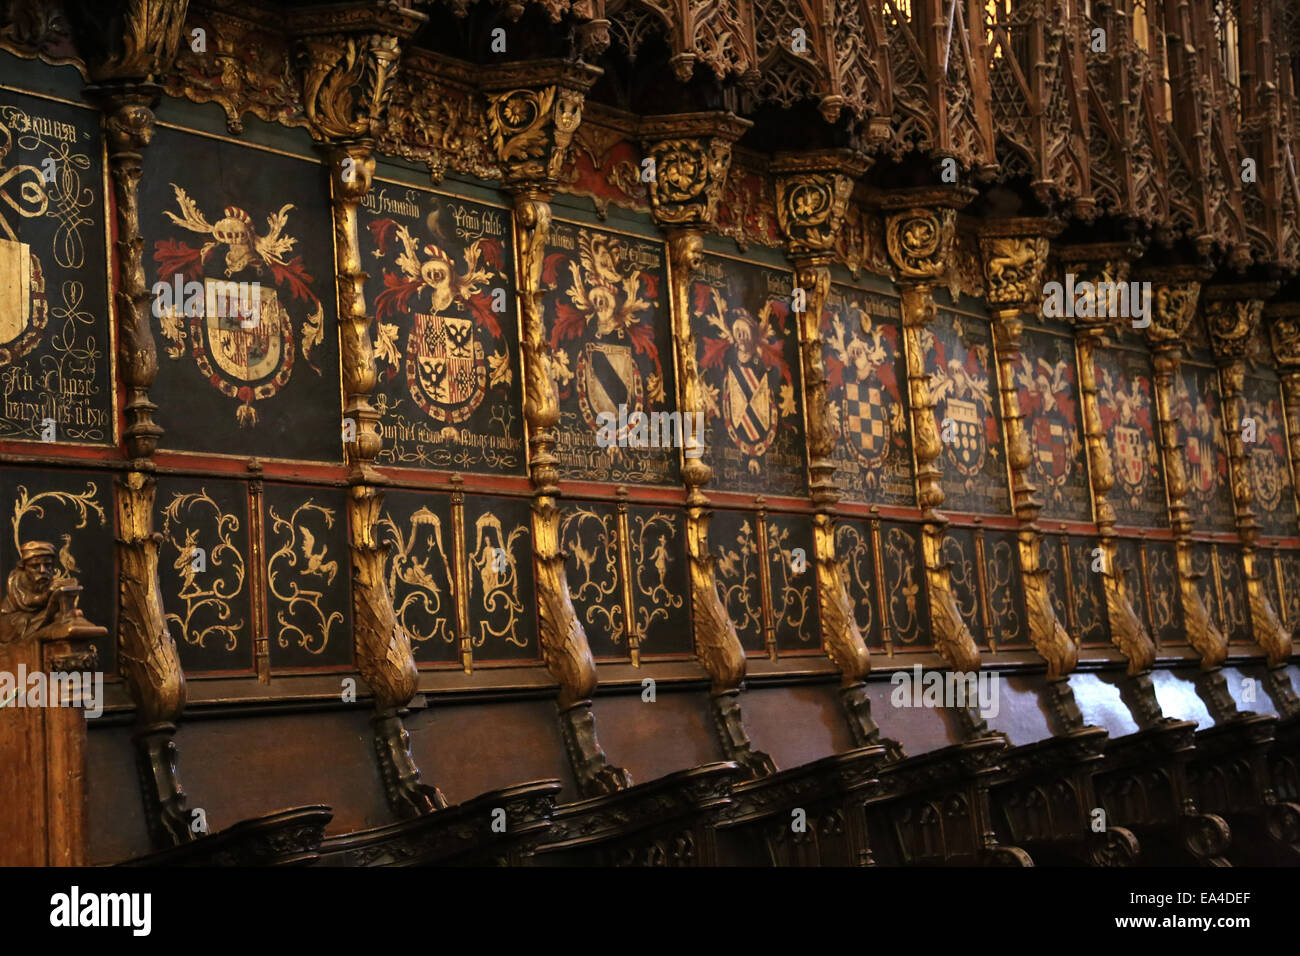 Spain. Barcelona. Cathedral of the Holy Cross and Saint Eulalia. The choir stalls. Detail of coats-of-arms. Stock Photo